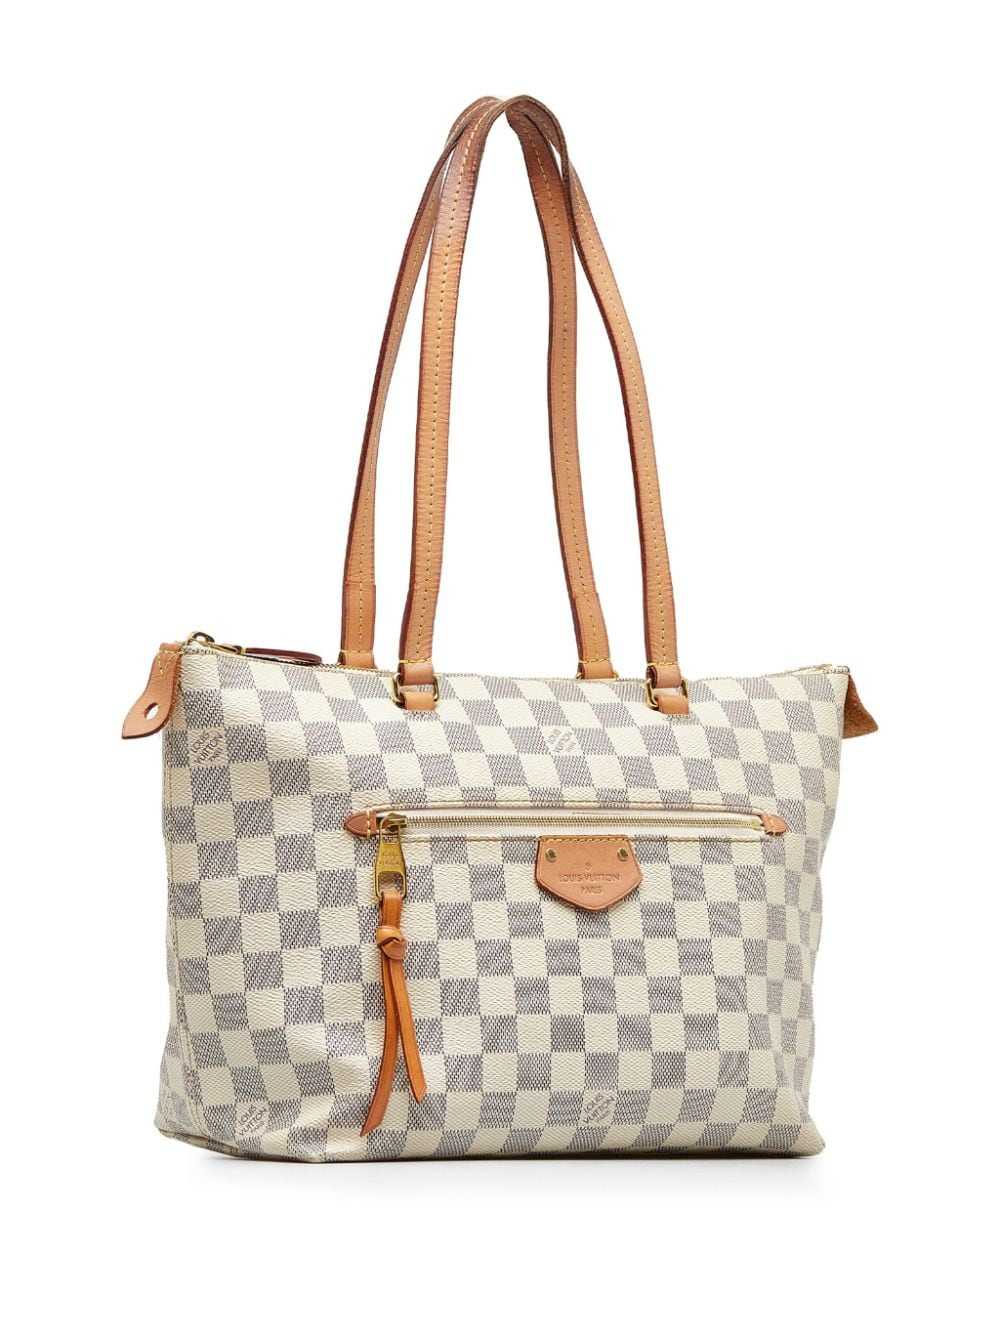 Louis Vuitton Pre-Owned 2019 pre-owned Damier Azu… - image 3